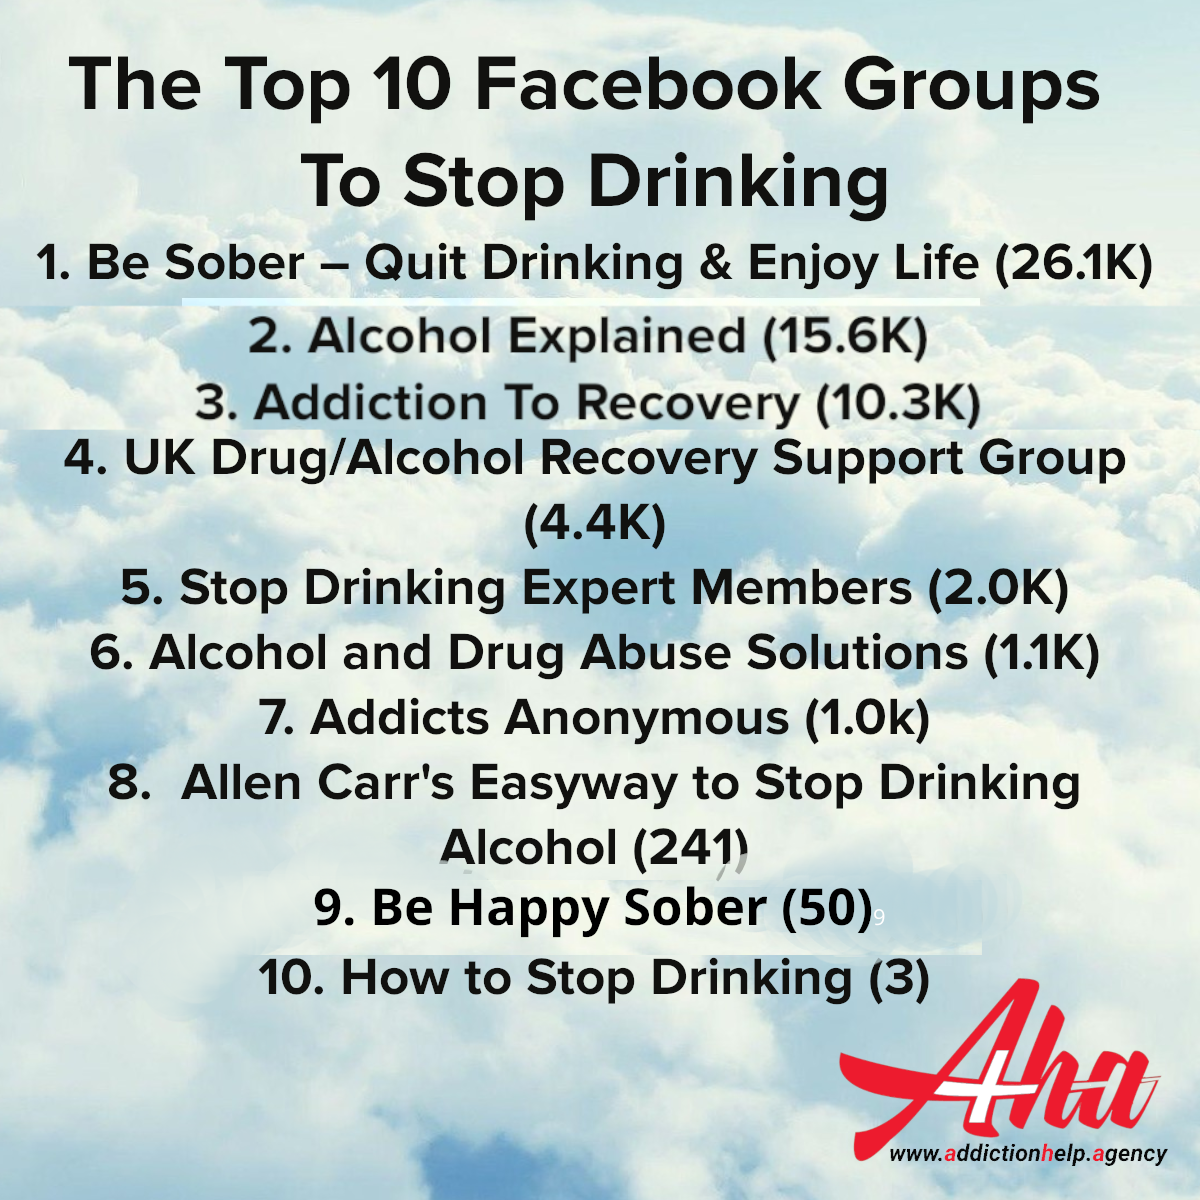 https://www.addictionhelp.agency/wp-content/uploads/2021/11/Top-10-Facebook-Groups-Posts-Cover.png